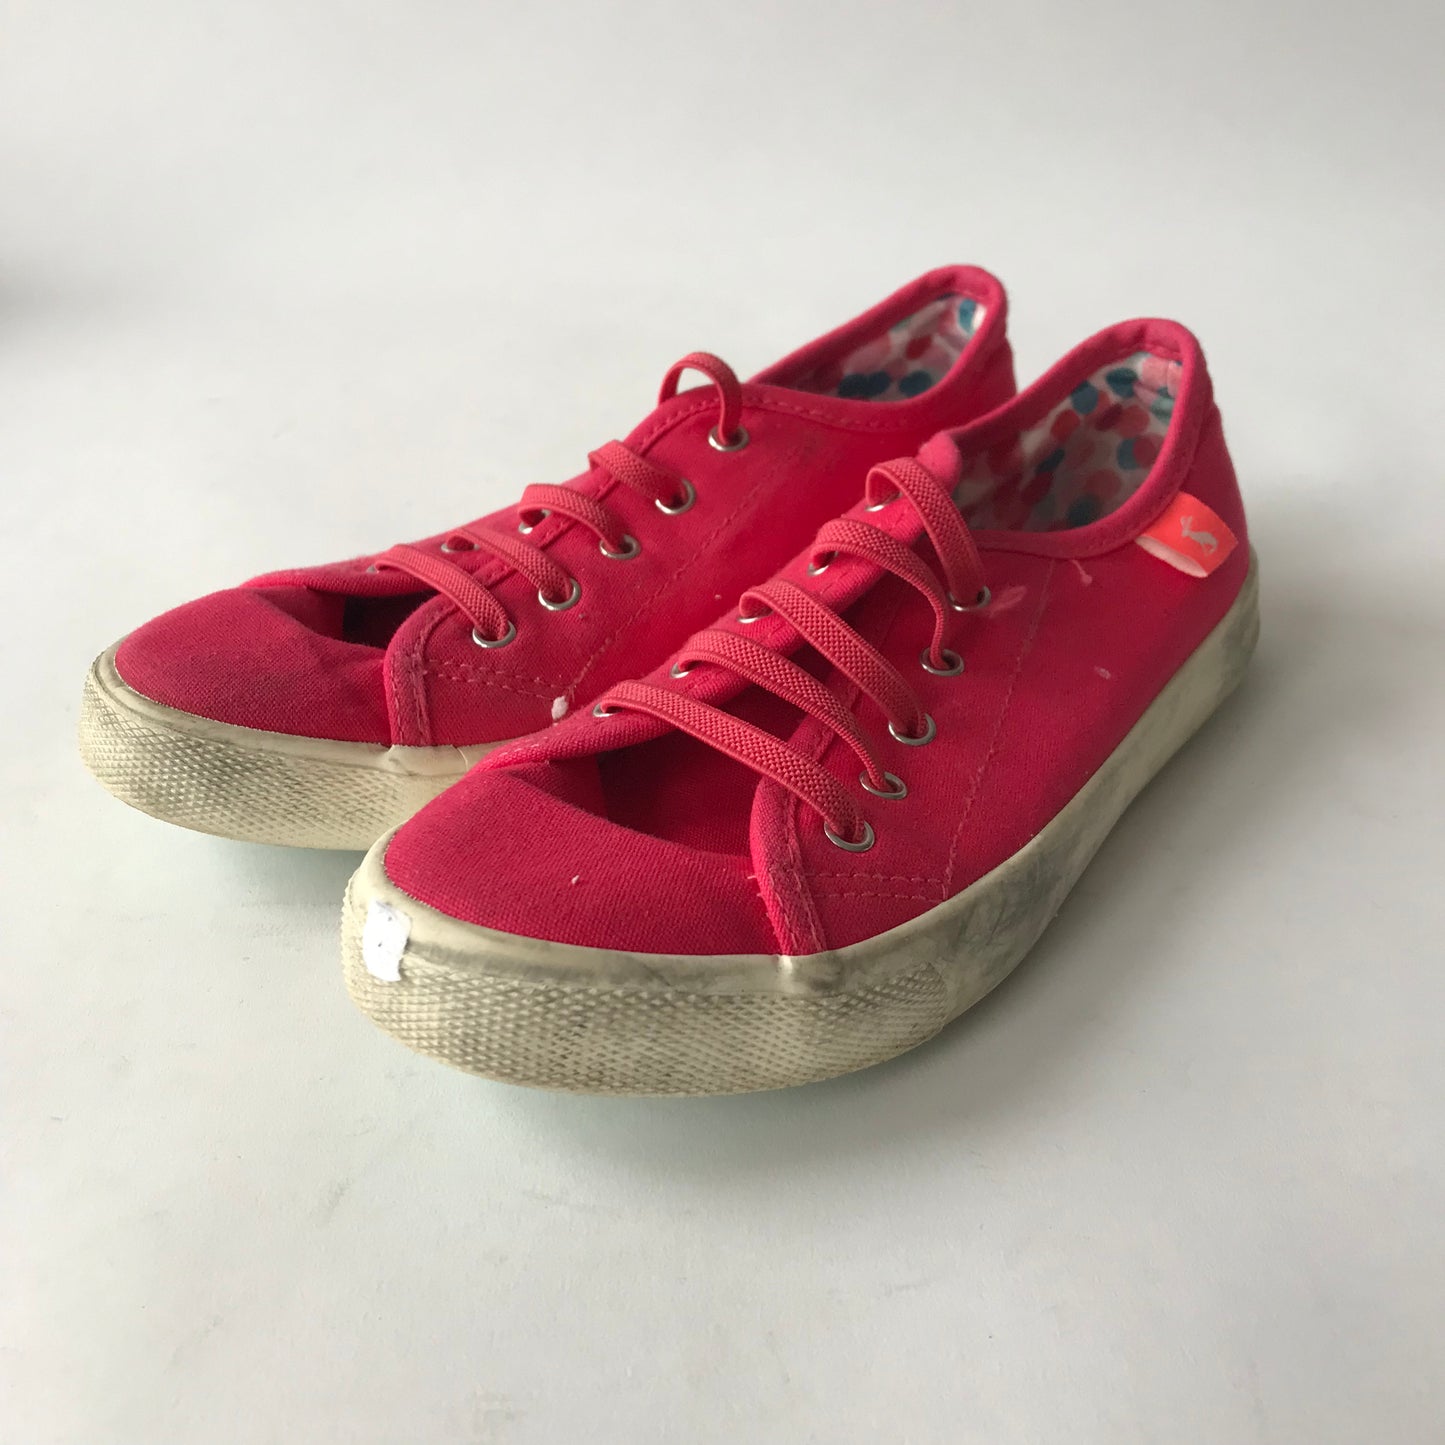 Joules Pink Trainers Shoe Size 2